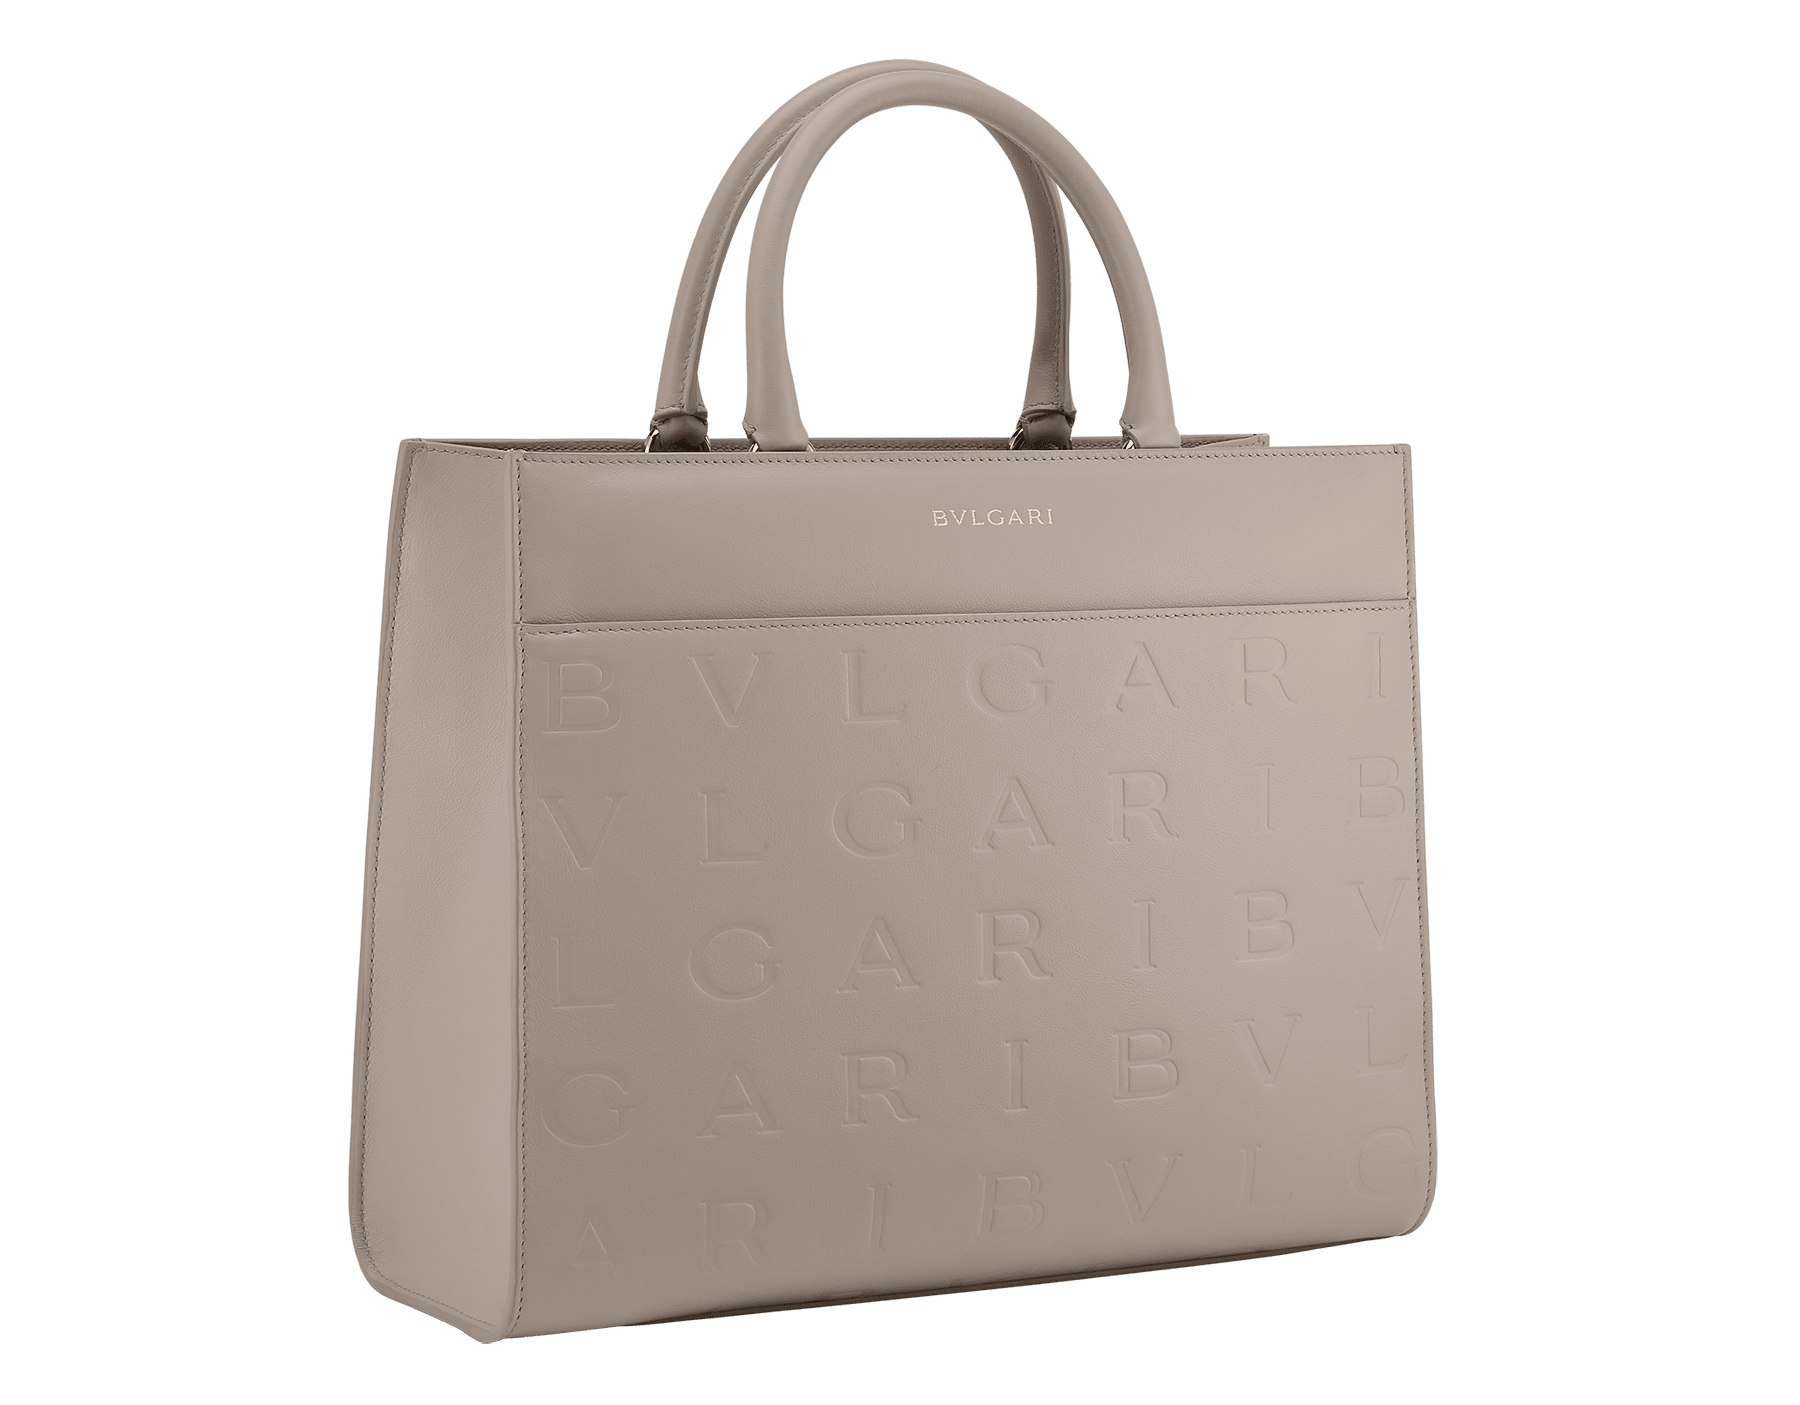 Bulgari Logo medium tote bag in black calf leather with hot-stamped Infinitum pattern on the main body and teal topaz green grosgrain lining. Light gold-plated brass hardware and magnet closure. BVL-1251M-ICL image 1